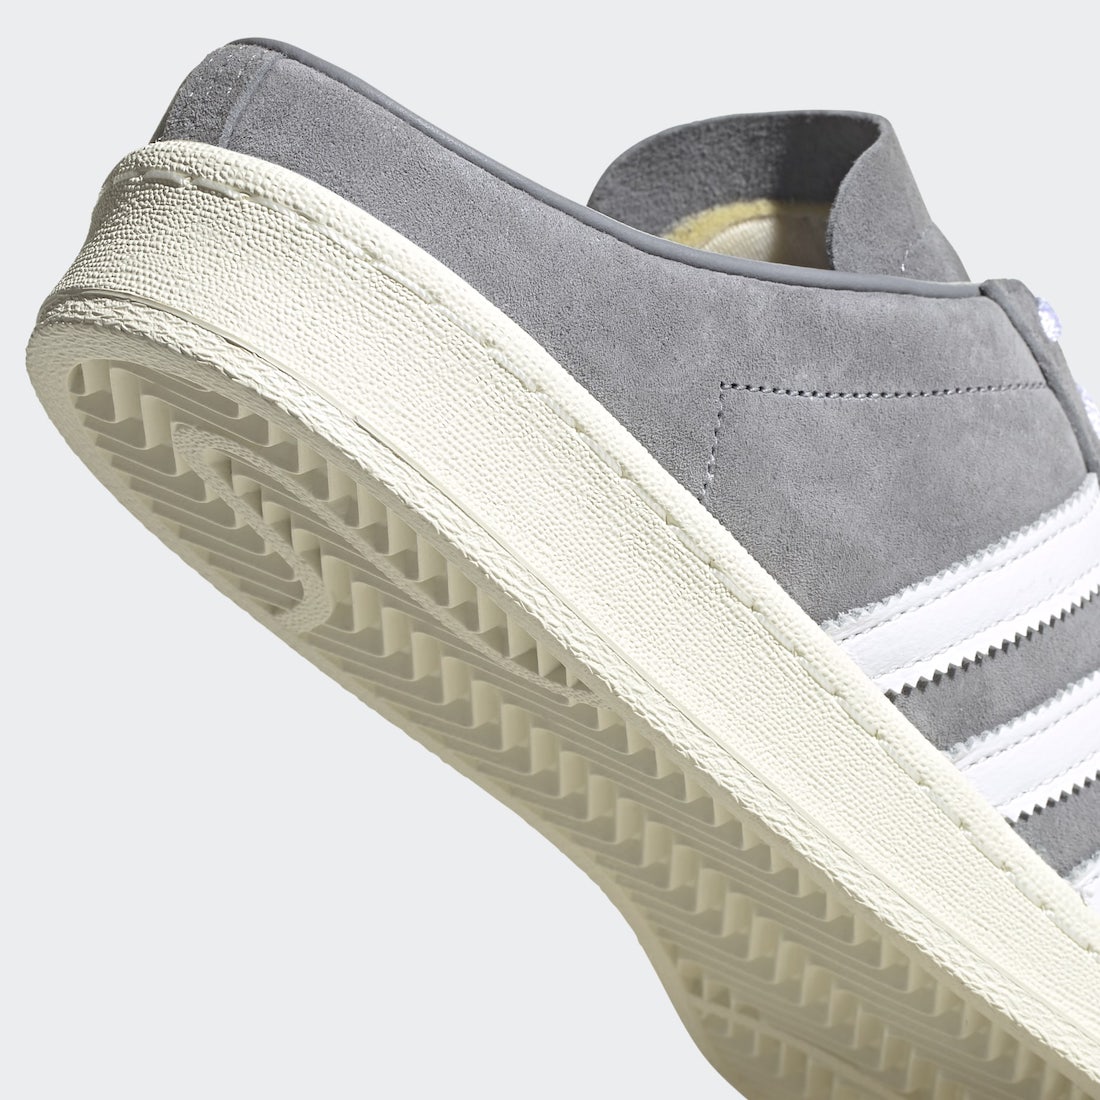 adidas Campus 80s Mules Grey FX5841 Release Date Info